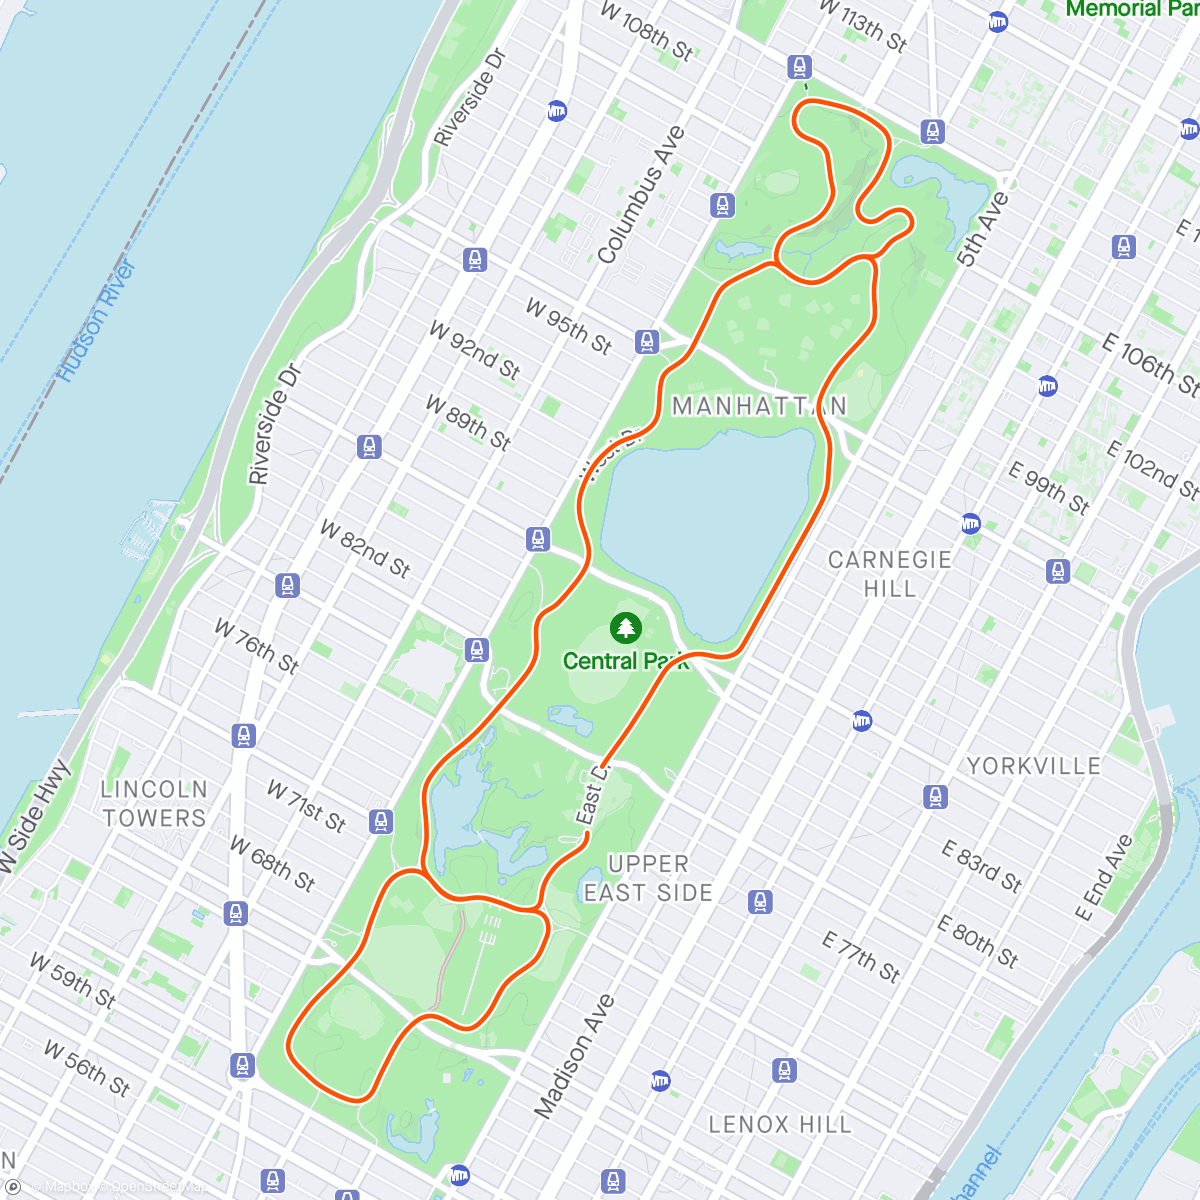 Map of the activity, Zwift - Astoria Line 8 in New York